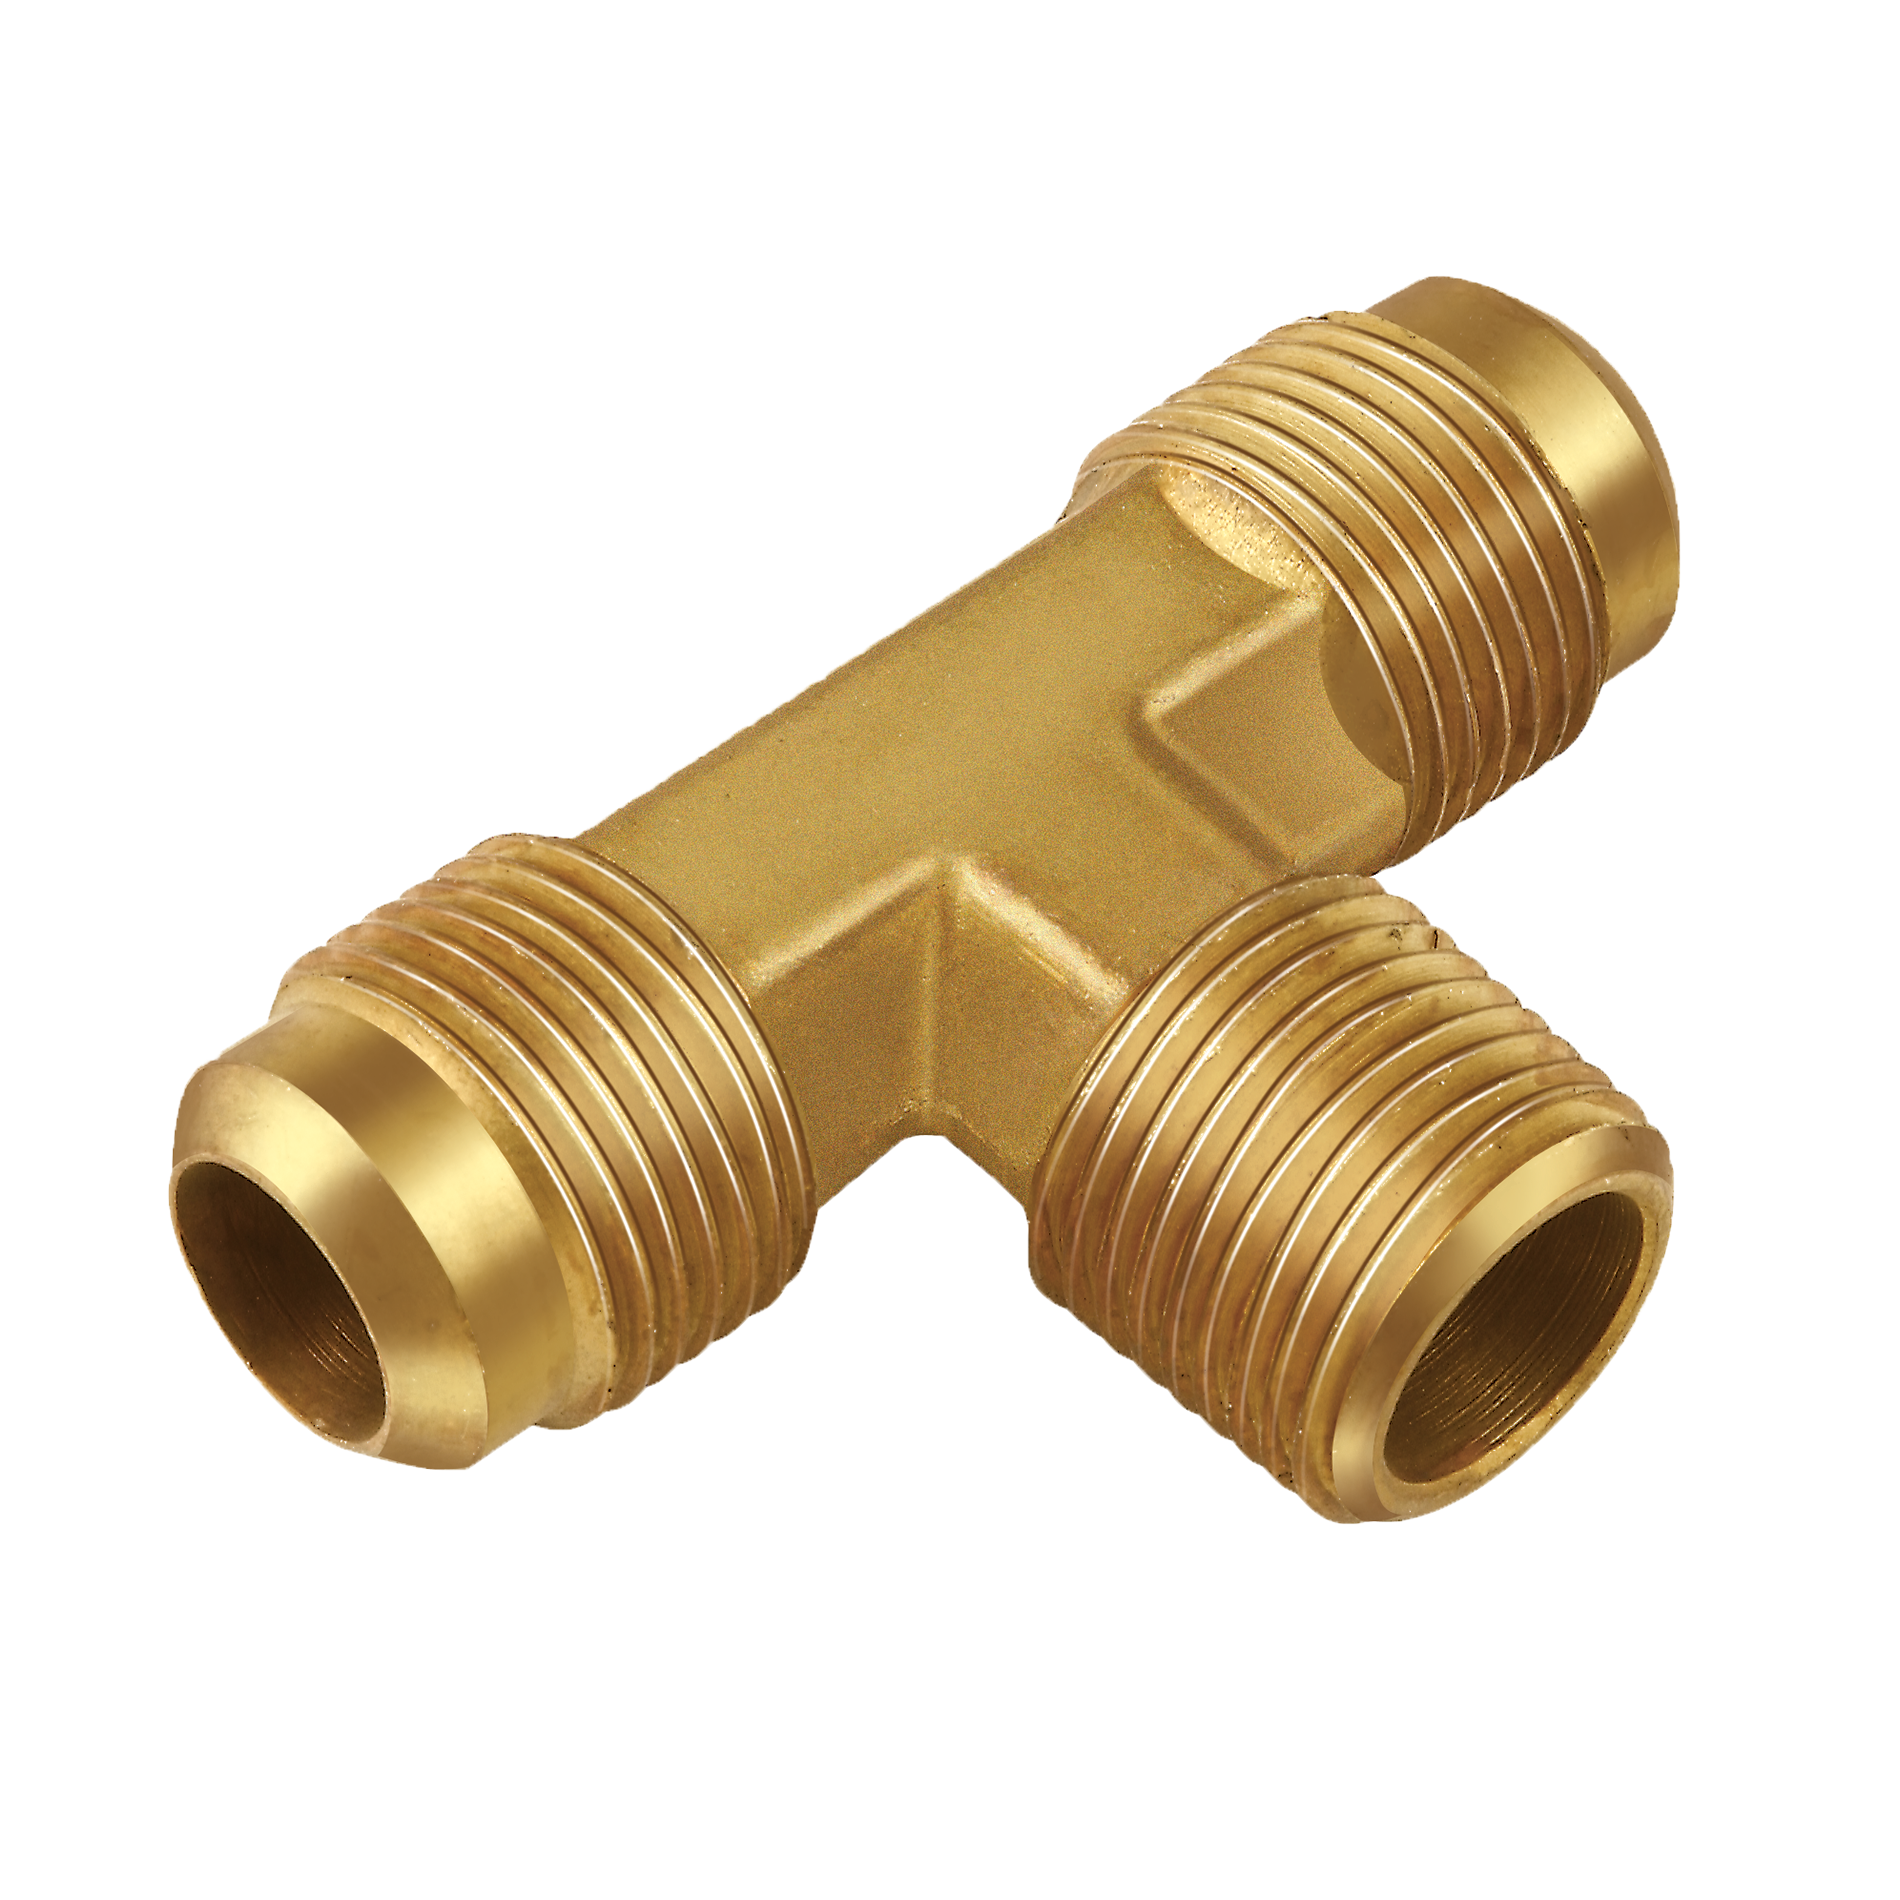 T1-4A Tee 1/4" Flare x 1/4" Flare x 1/8" Male Pipe Thread